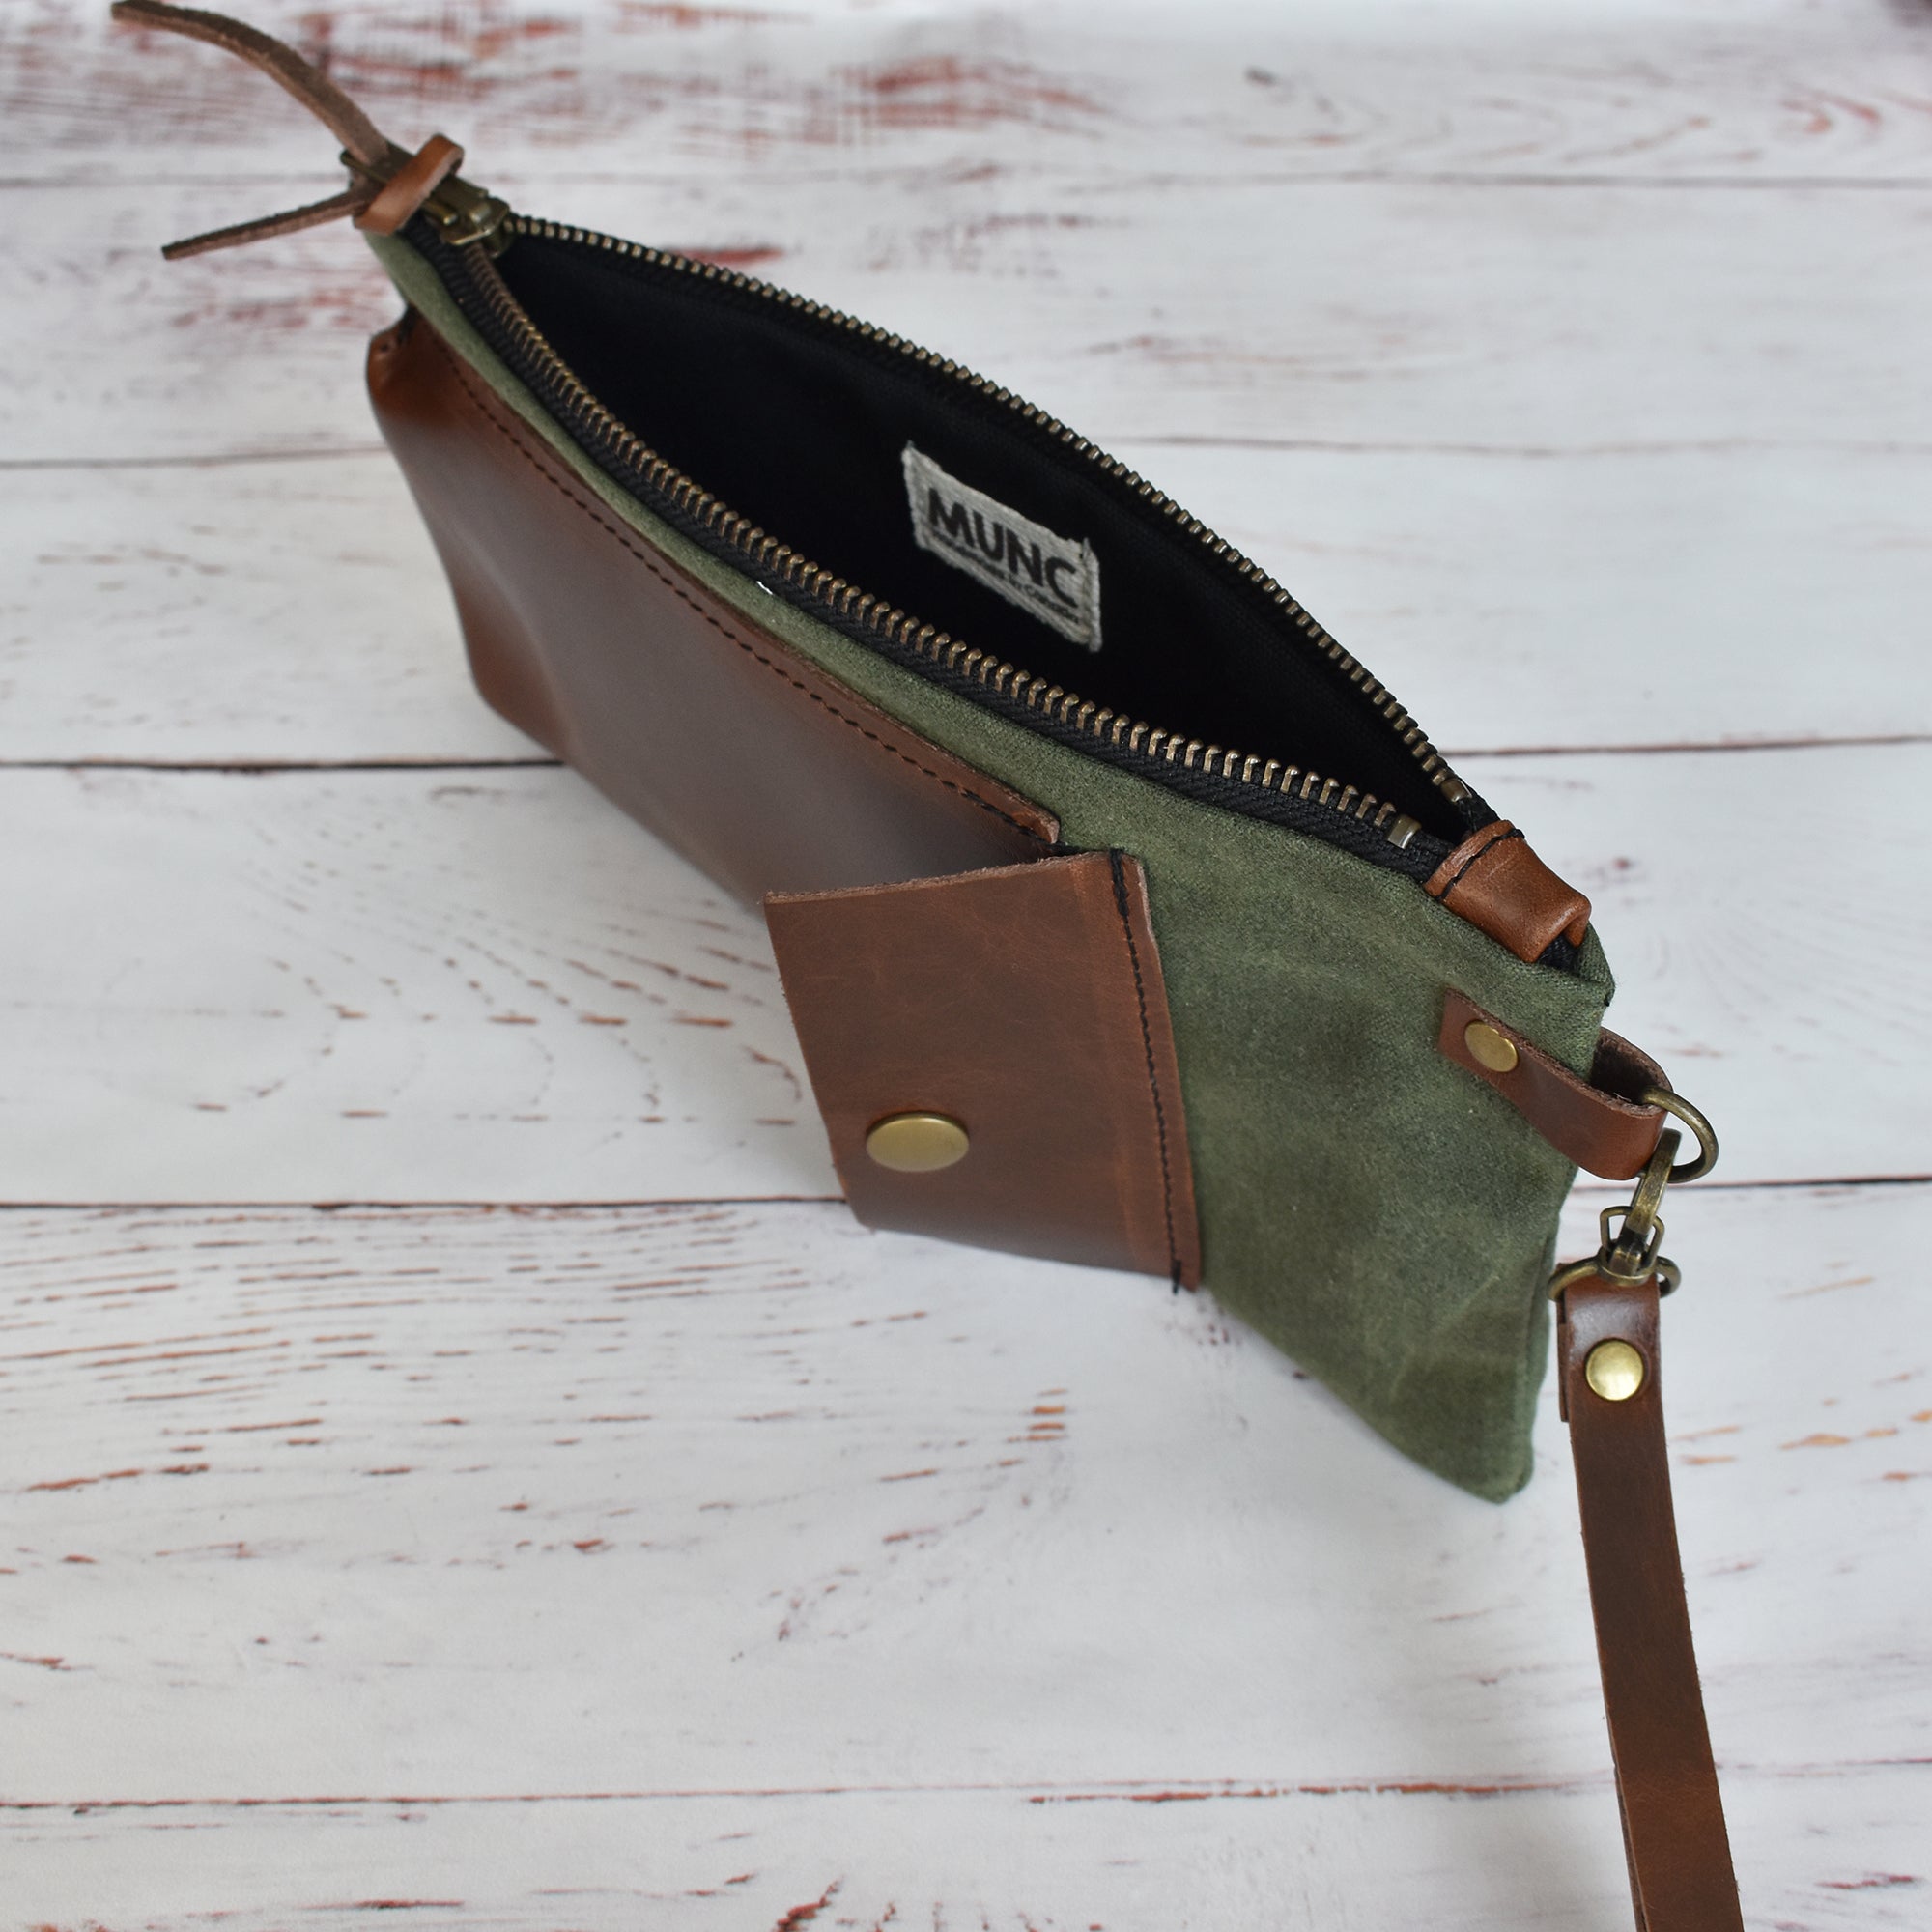 MUNC waxed canvas and veg tan leather pouch